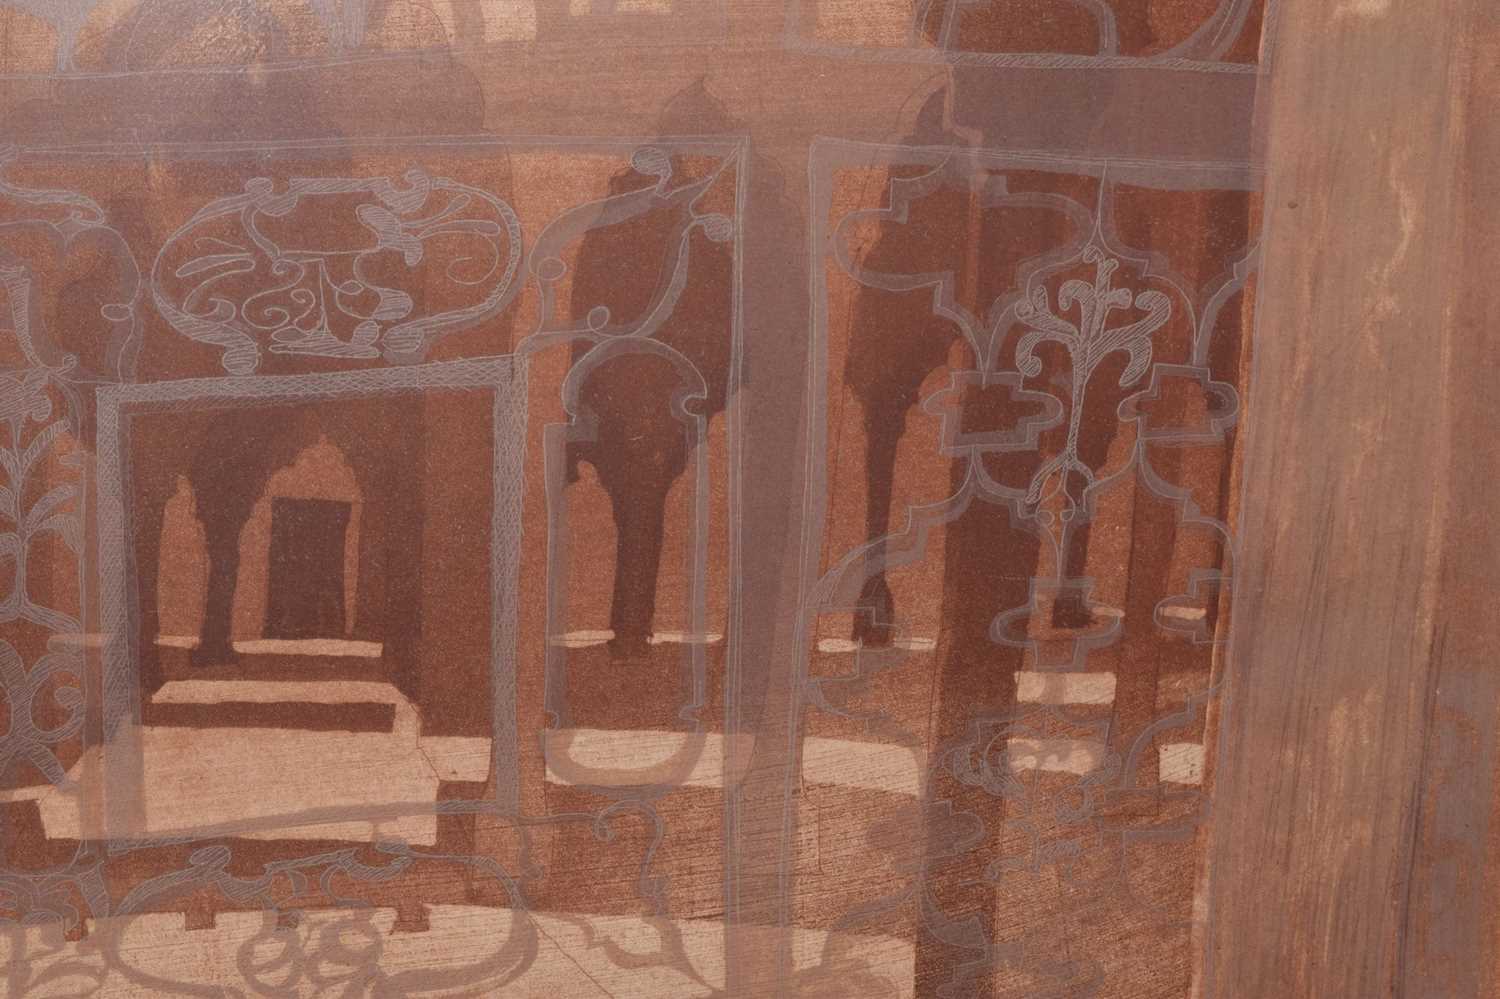 Alison Neville (b.1945) - Limited edition print - Diwan-i-Am, Agra Fort - Image 4 of 7